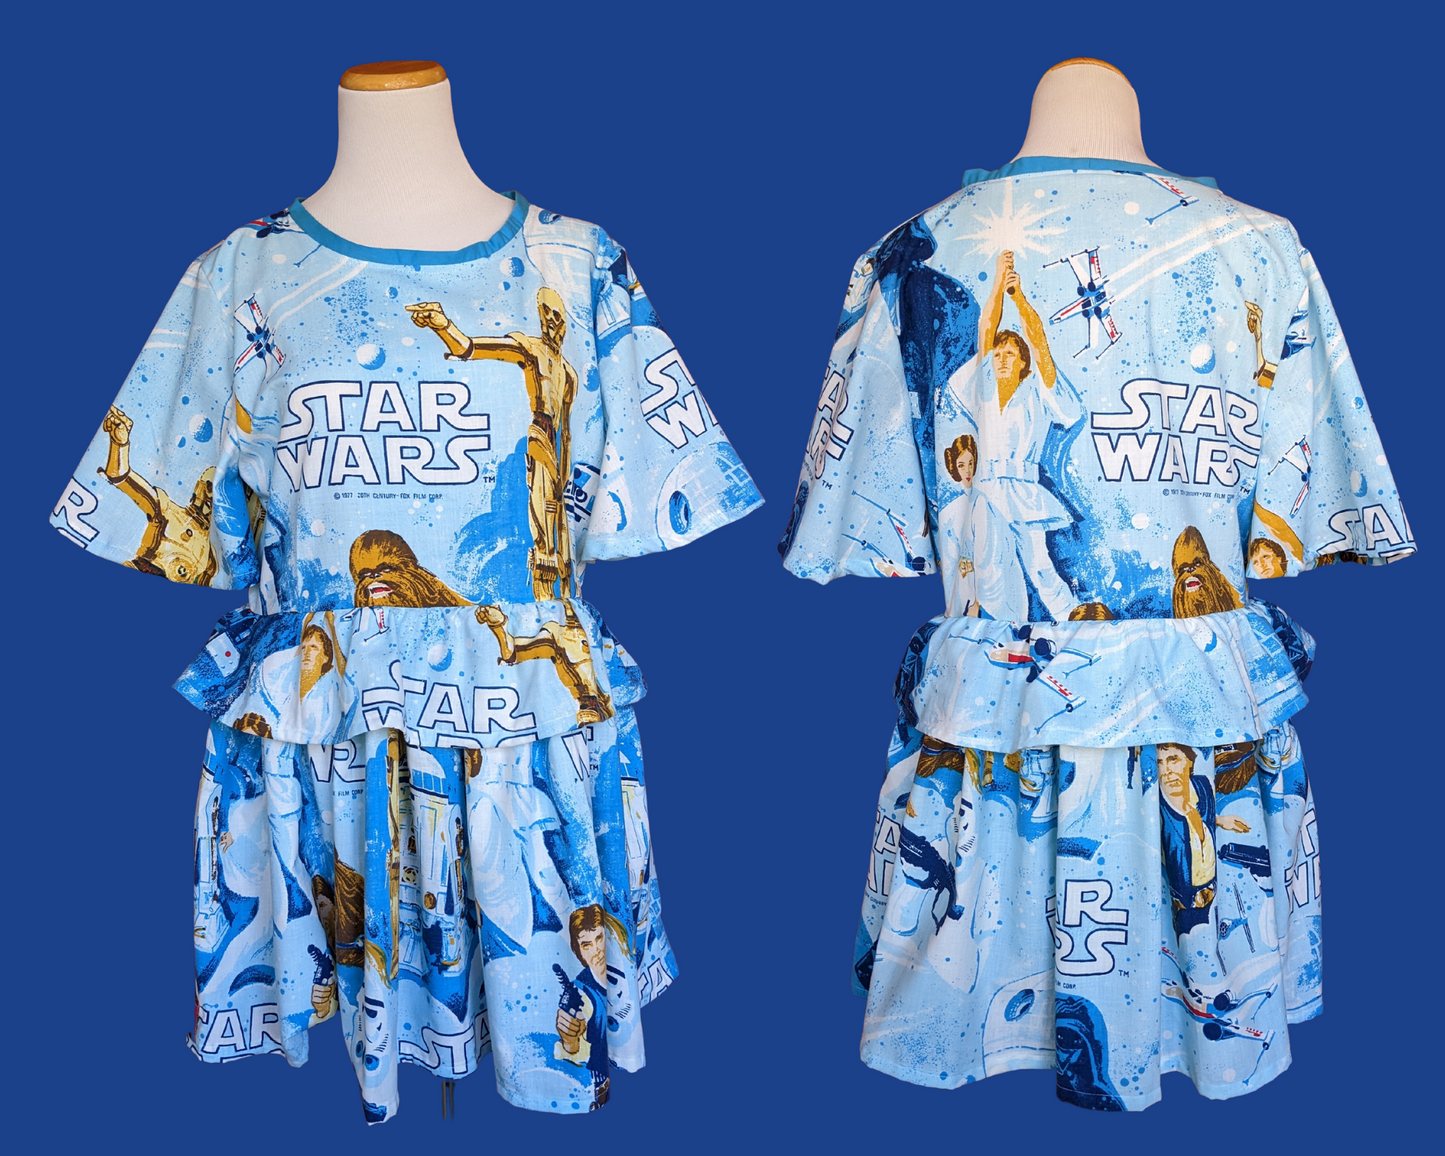 Handmade, Upcycled Vintage 1977 Star Wars, A New Hope Dress with Matching Detachable Collar Size M